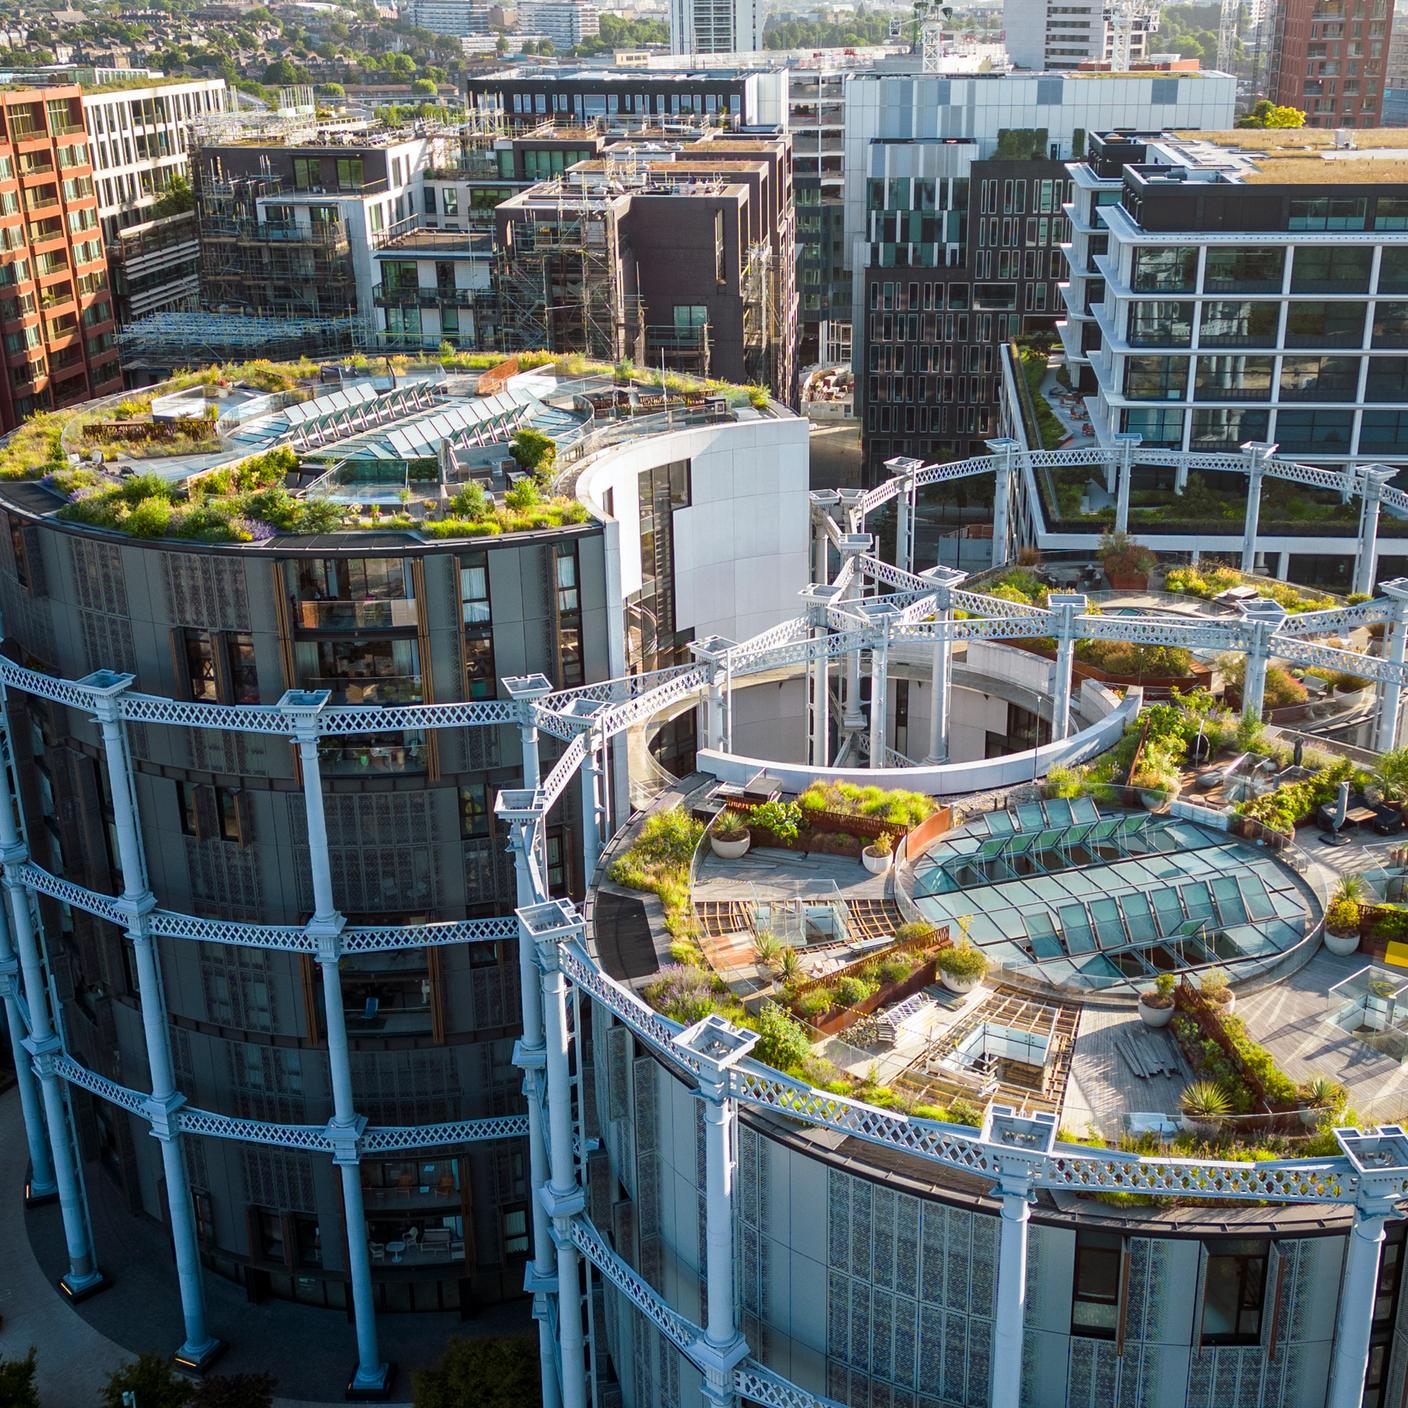 Aerial view of the roof gardens at Gasholder Park, Kings Cross